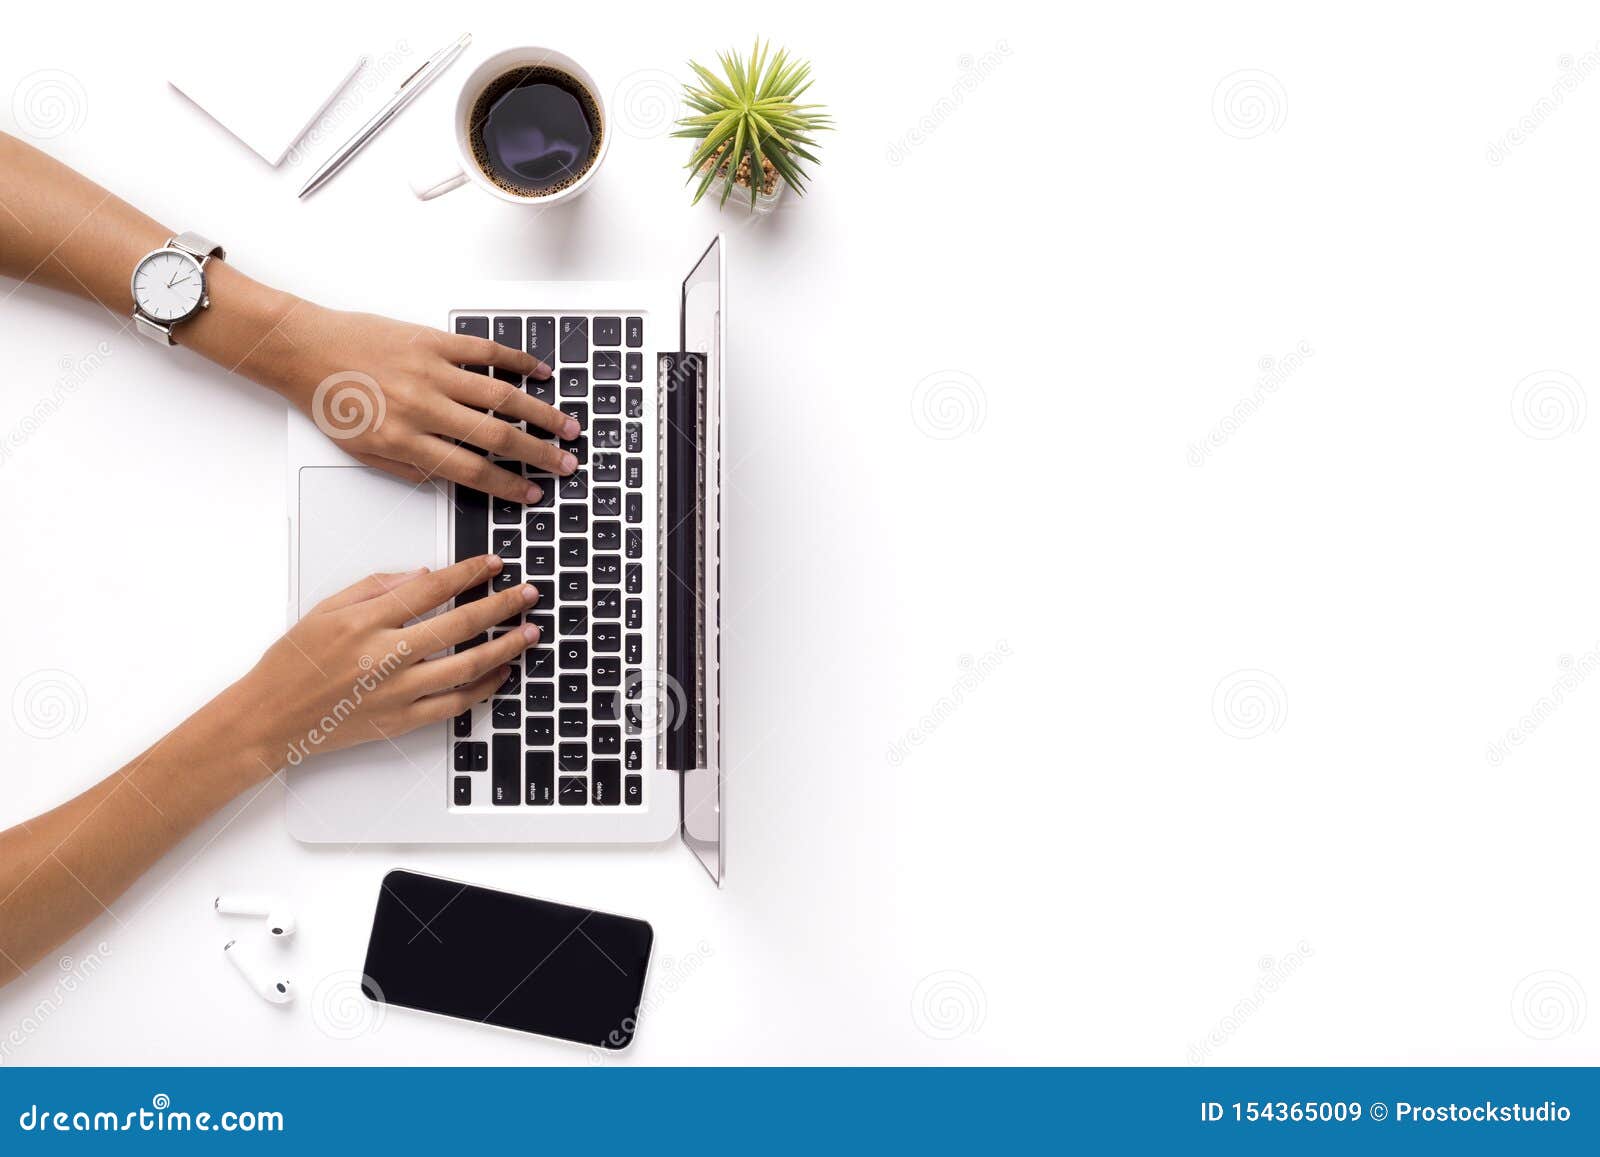 woman typing on laptop on clean white office table with plant